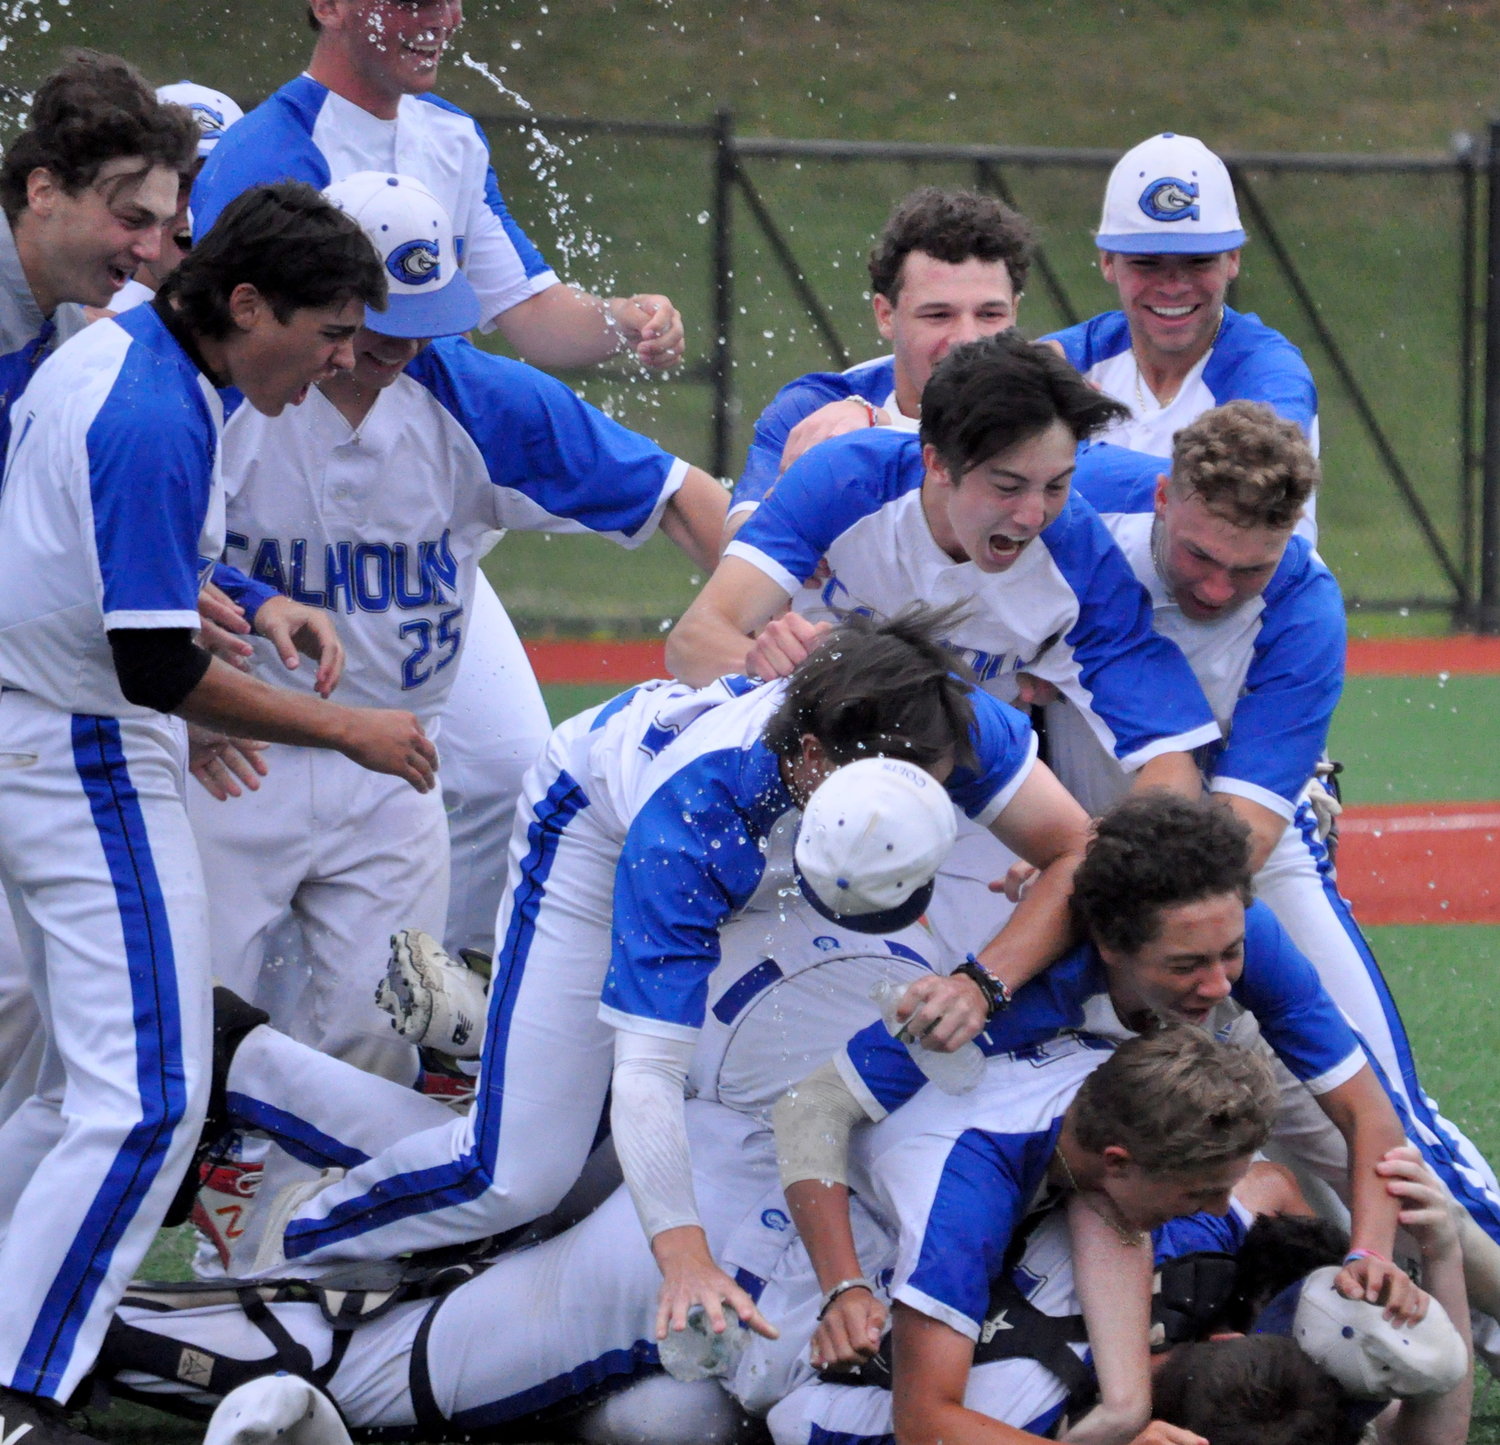 Calhoun celebrated its first county baseball title since 2012 on Wednesday after beating Clarke, 12-6, in Game 3 of the Class A championship series.